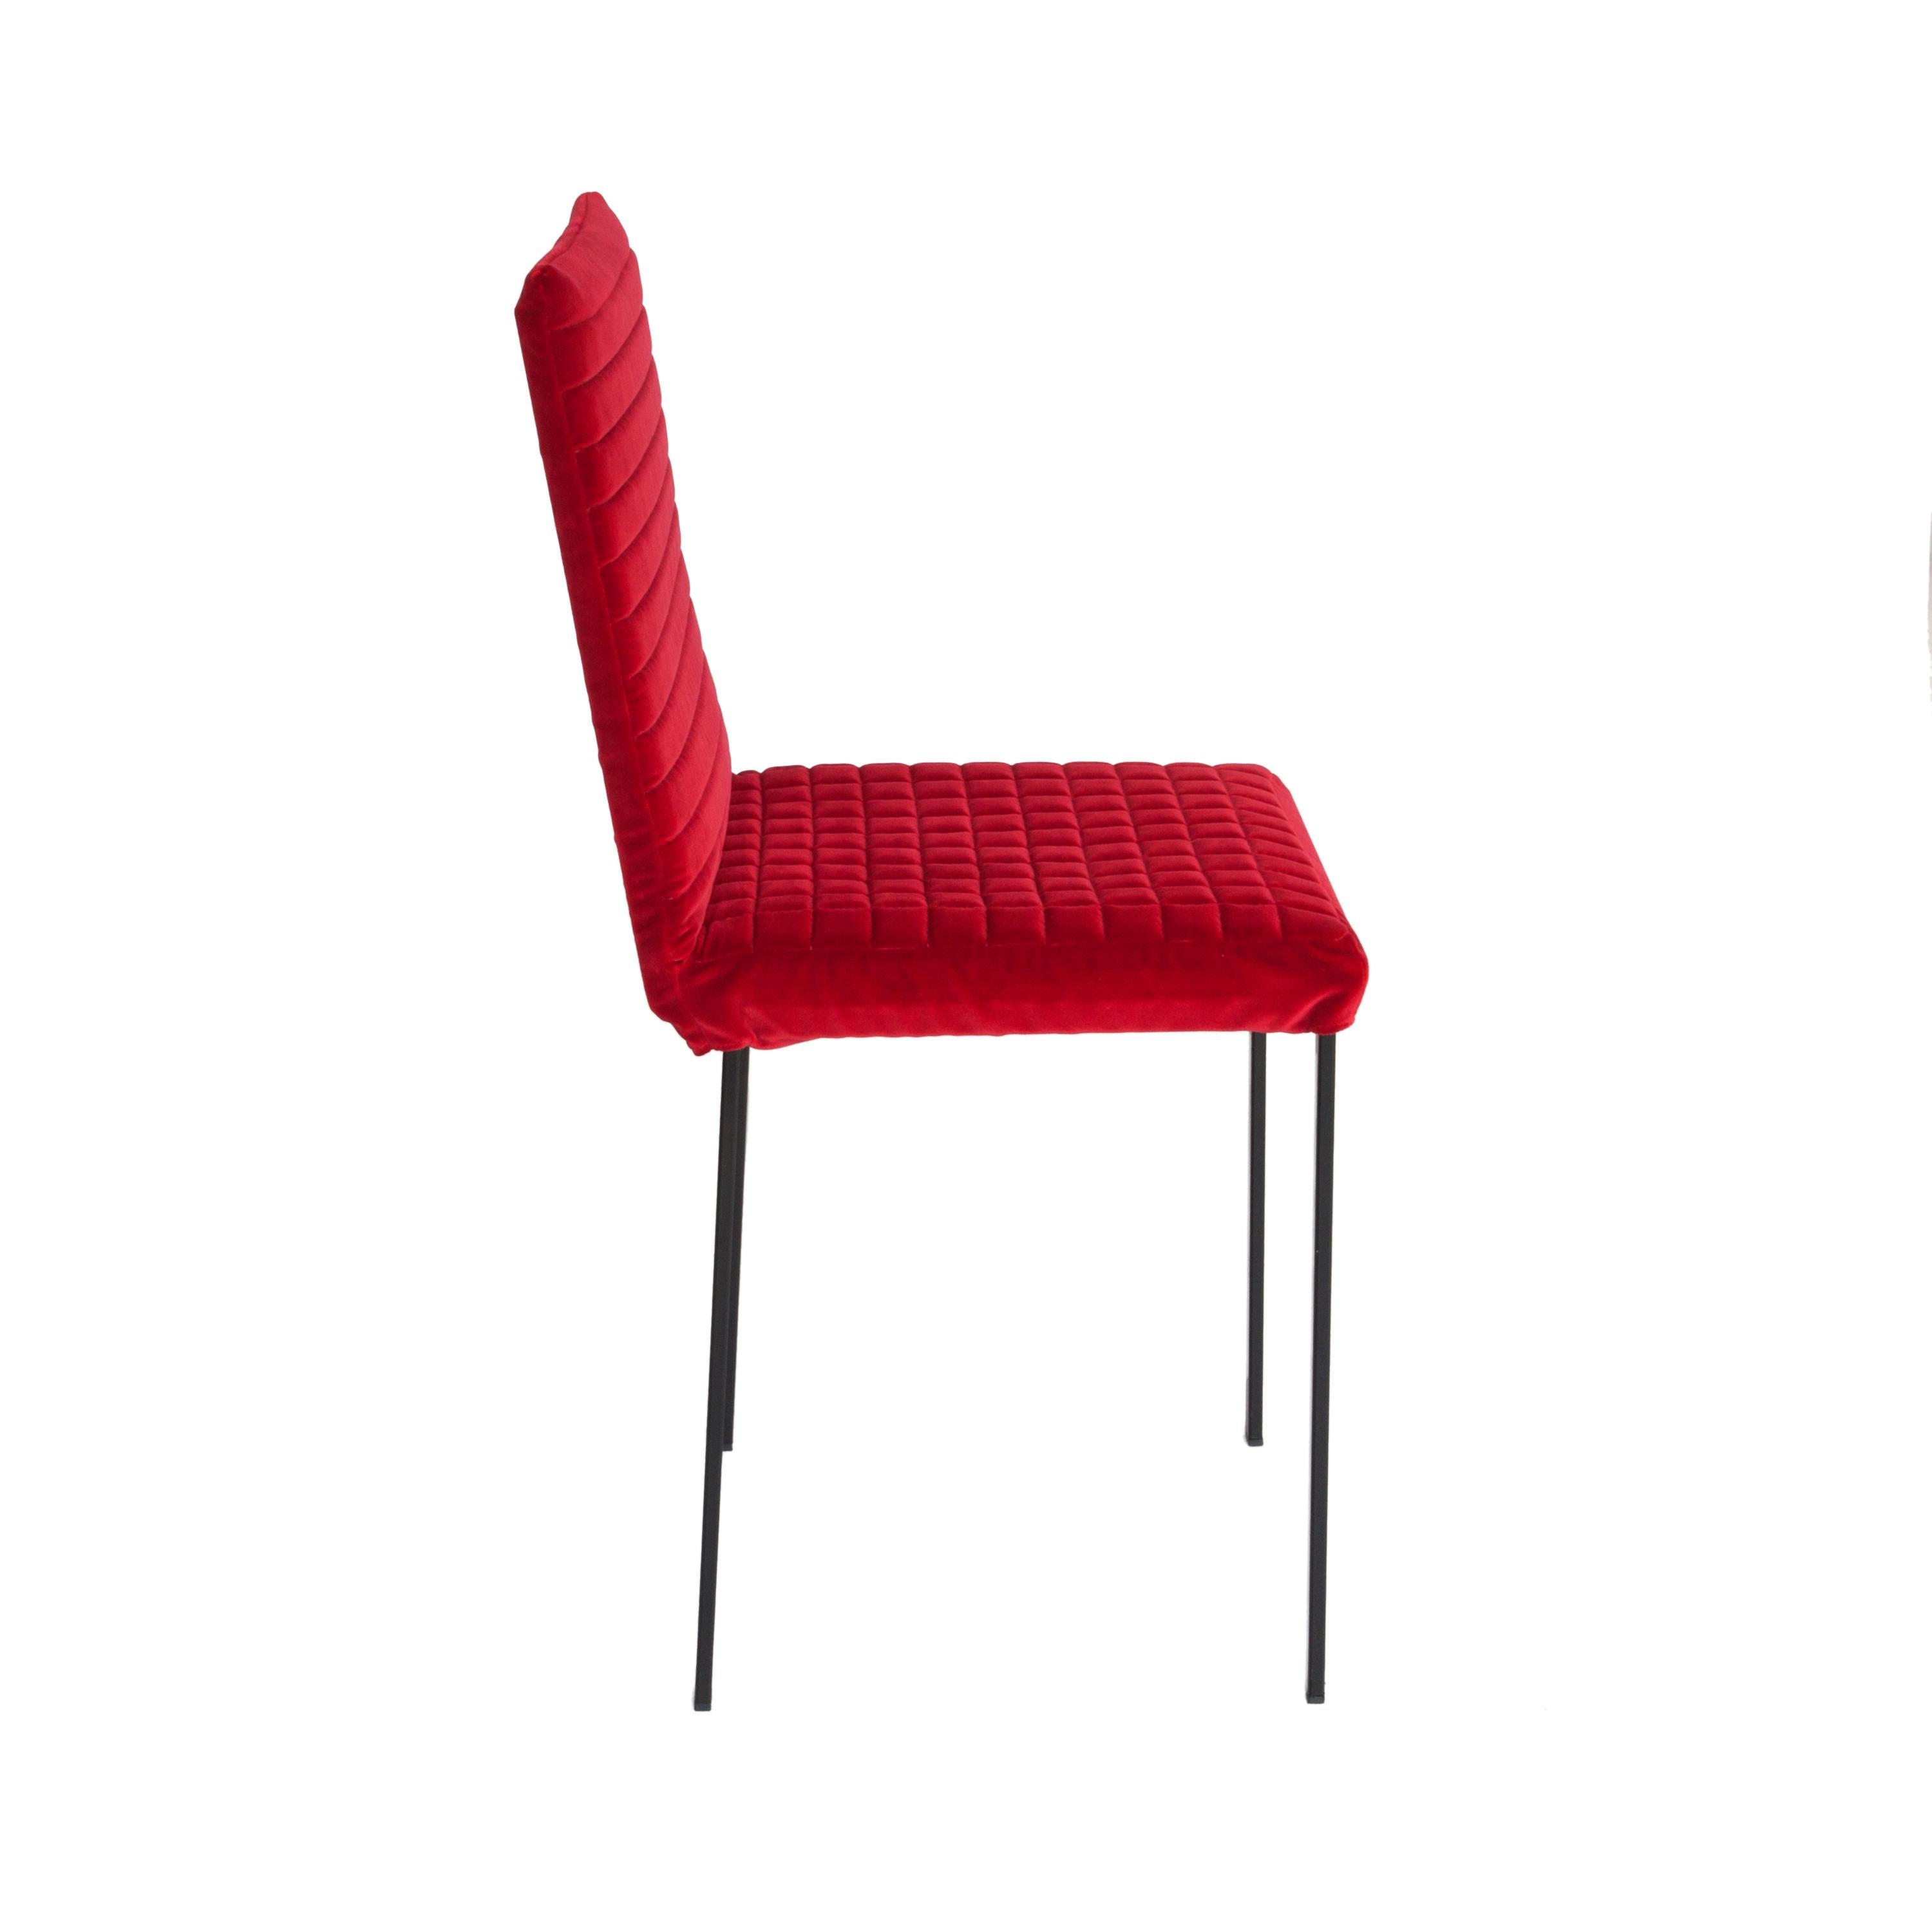 Mid-Century Modern Contemporary Tanit Soft Chair with Red Velvet Cover For Sale